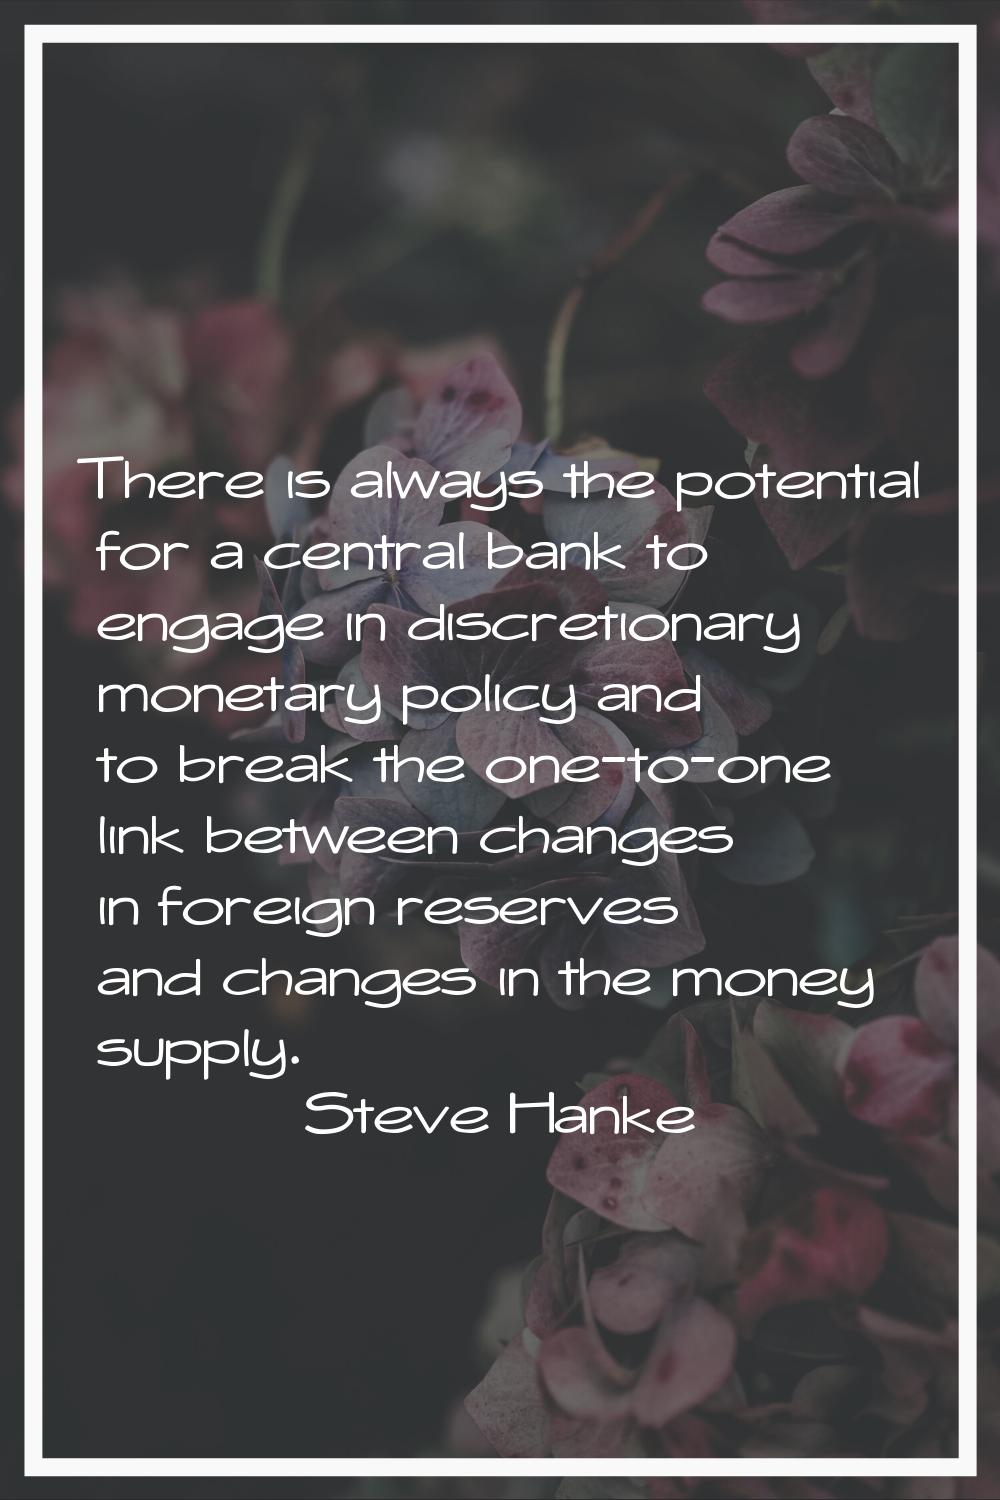 There is always the potential for a central bank to engage in discretionary monetary policy and to 